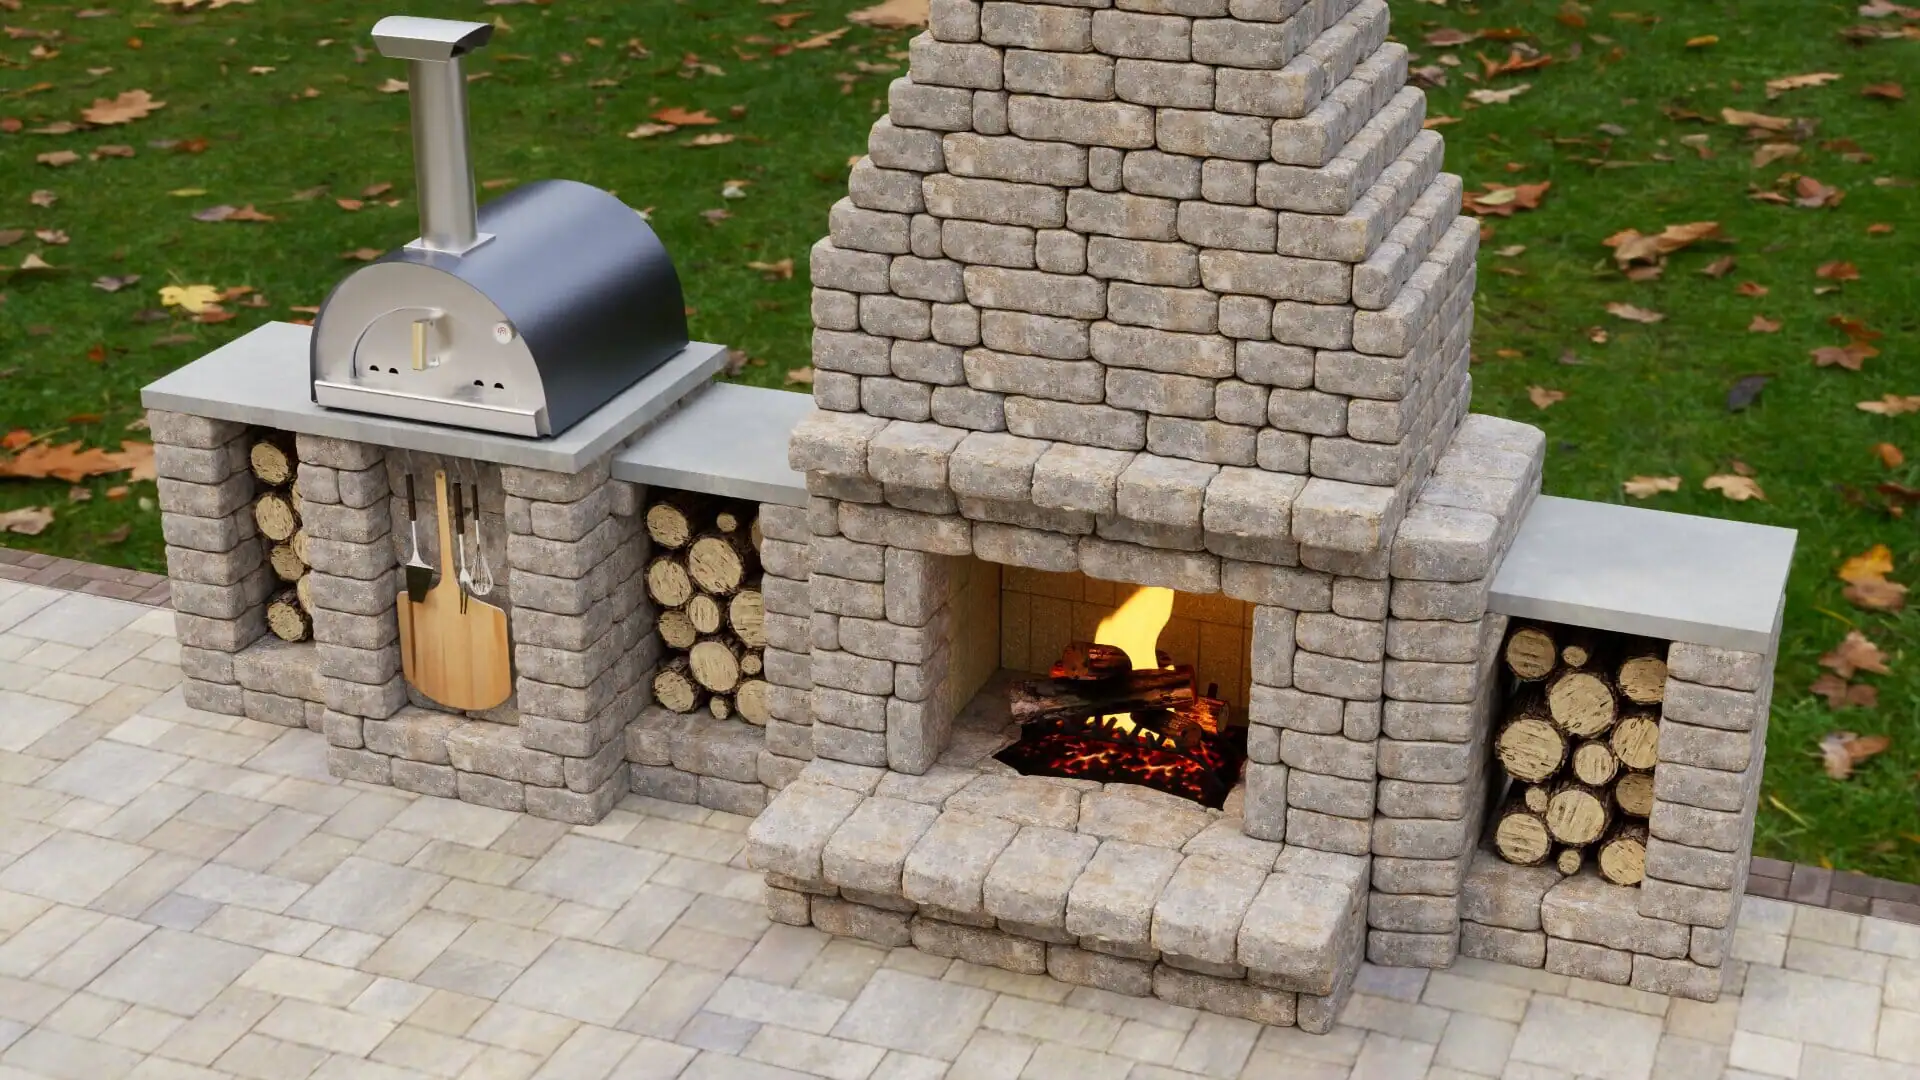 How To Build An Outdoor Fireplace With A Pizza Oven